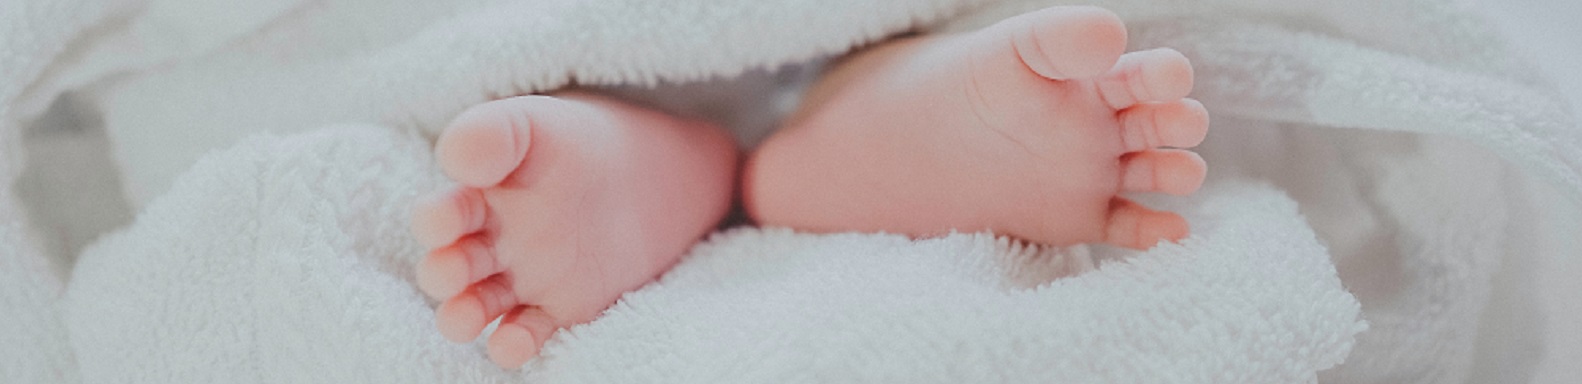 A newborn's feet stick out from soft white blankets